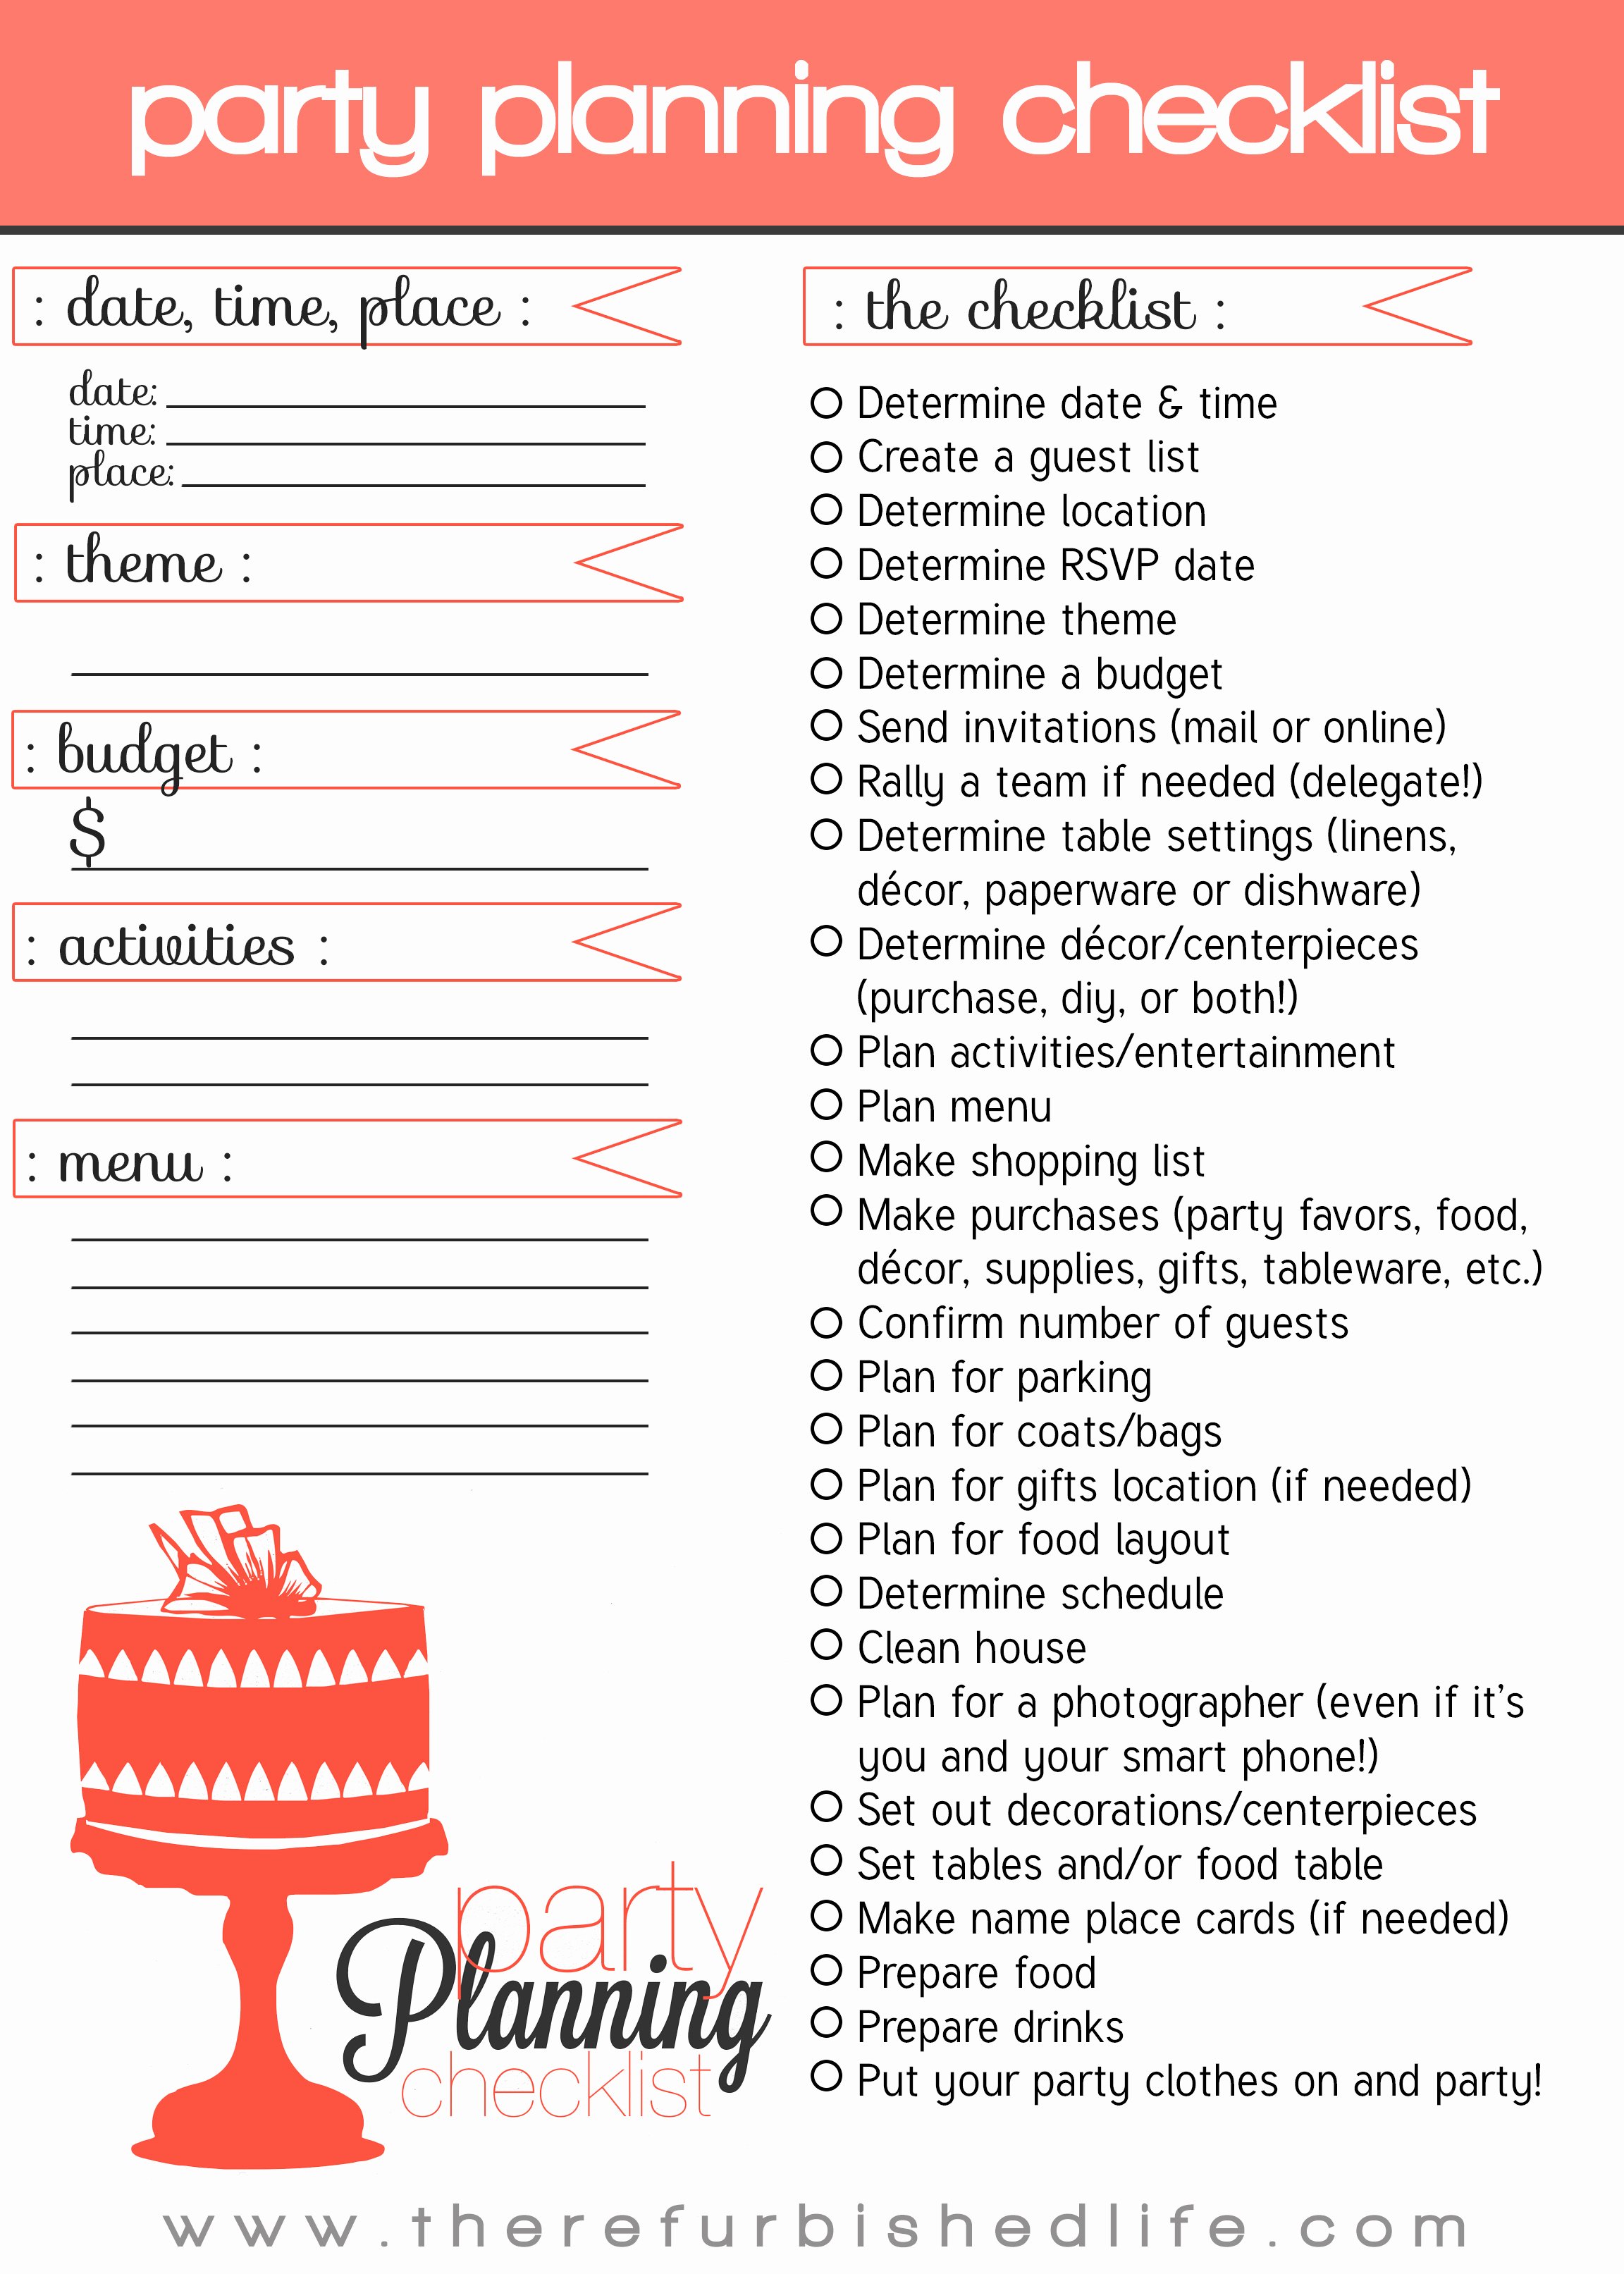 Party Planning 101 with Printable Checklist – the